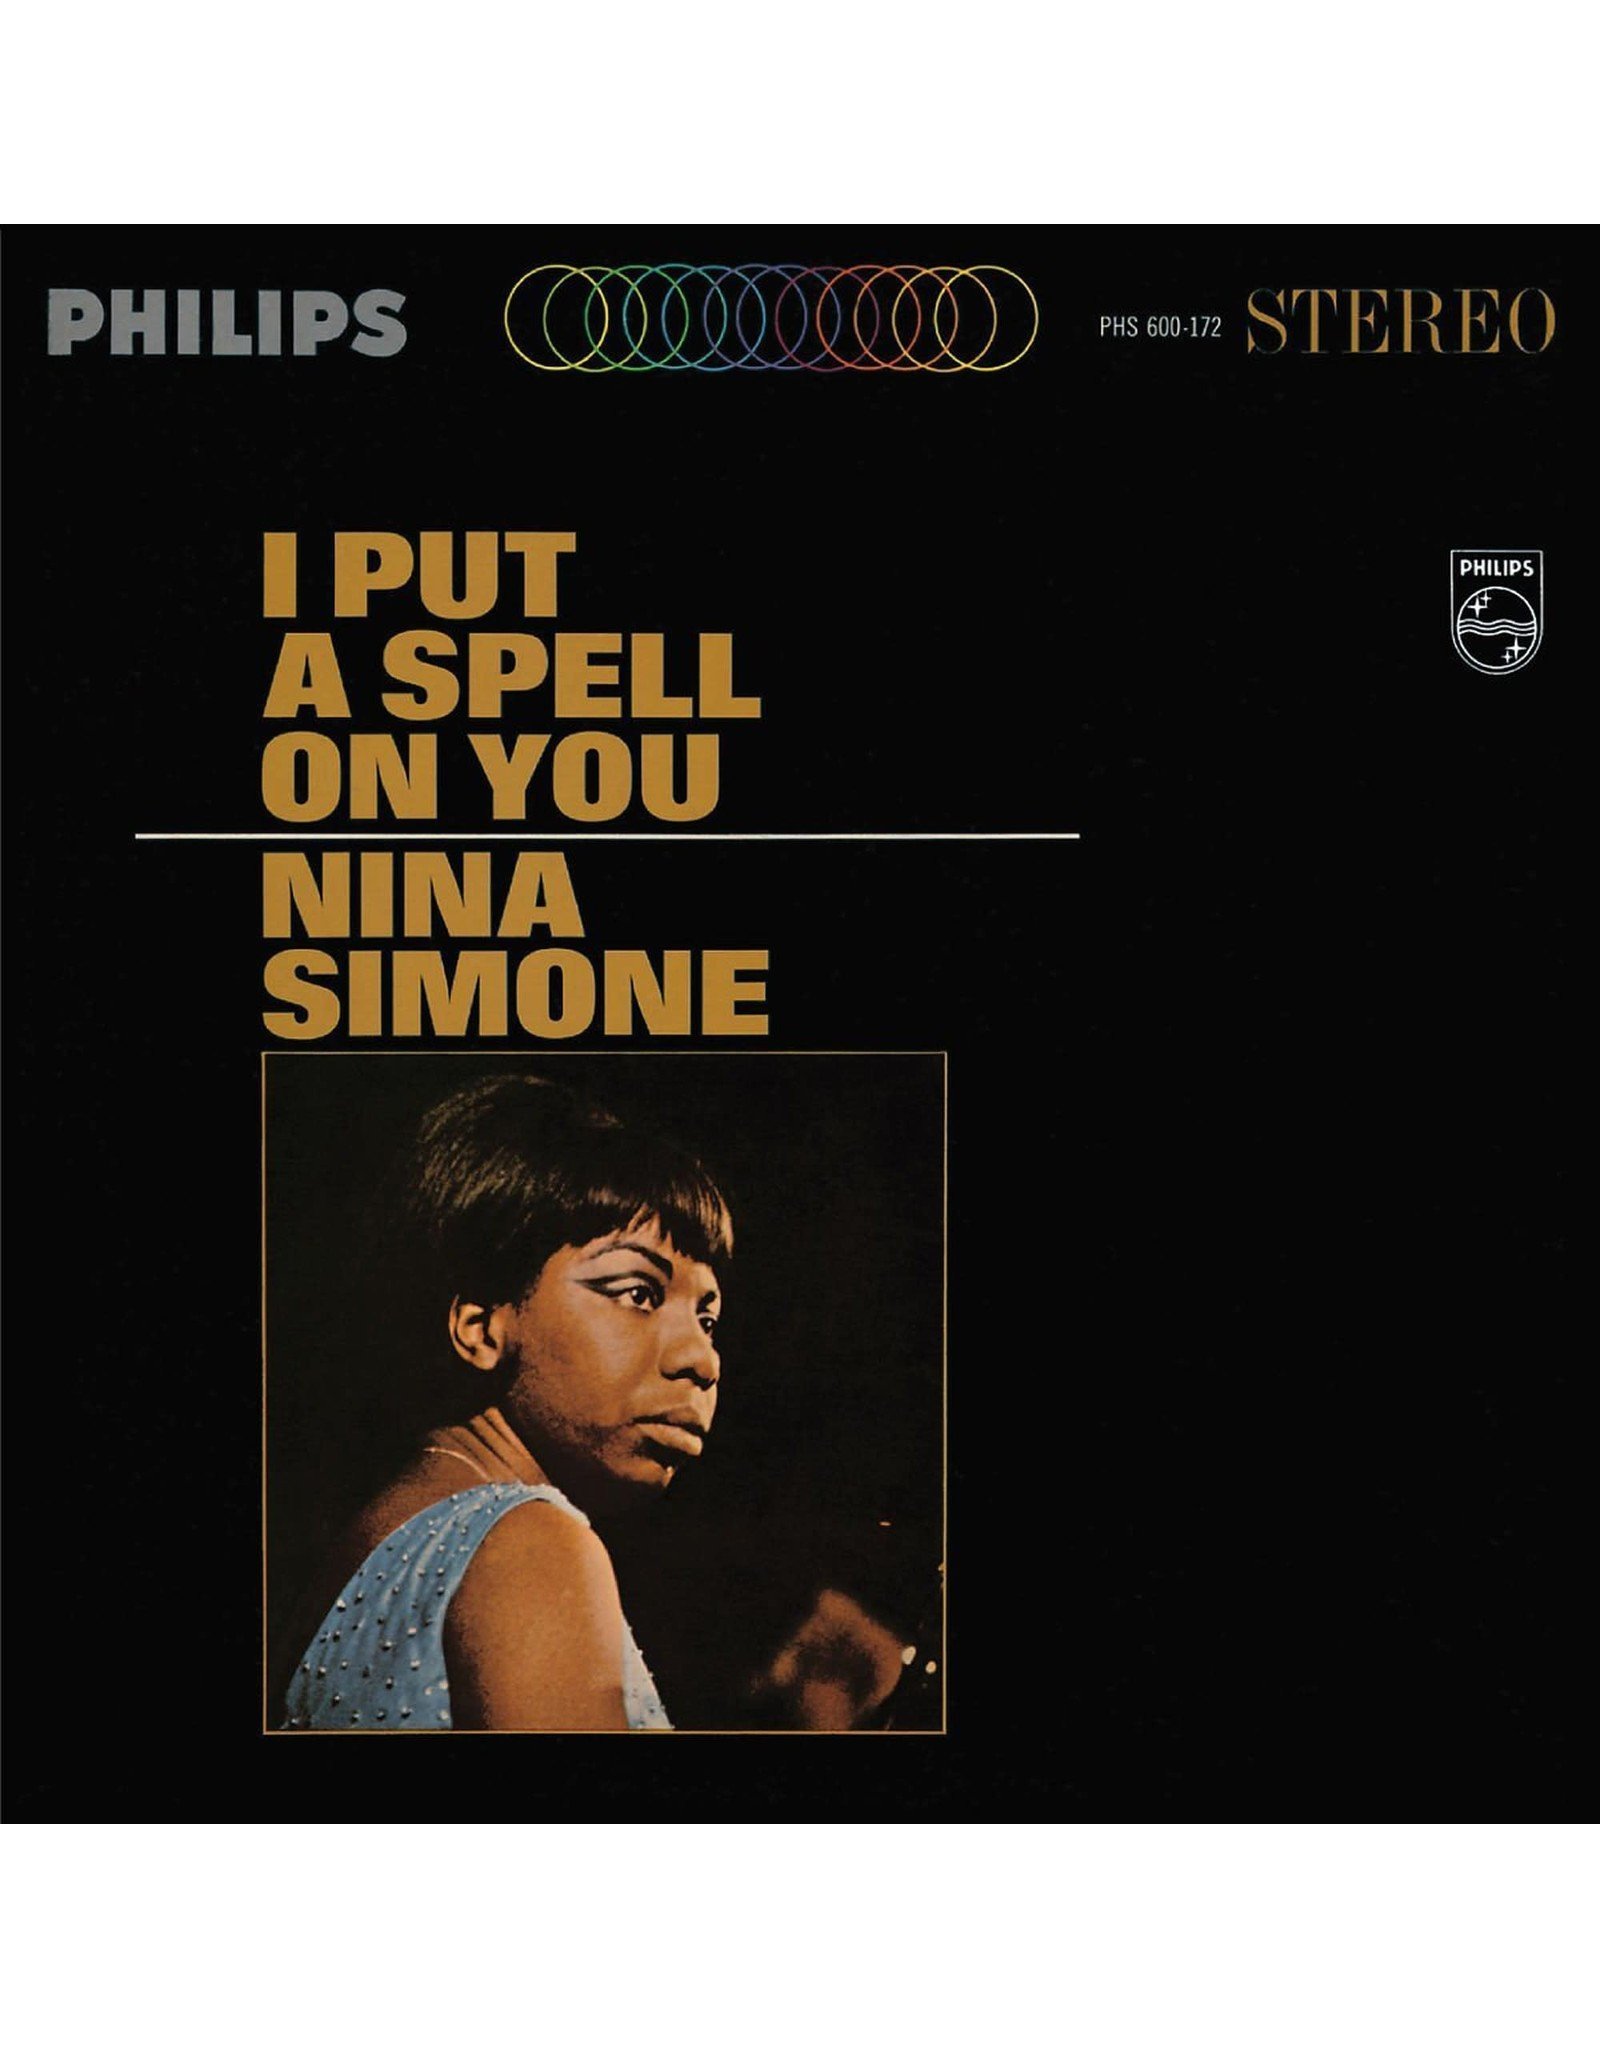 Nina Simone - I Put A Spell On You (Verve Acoustic Sounds Series)